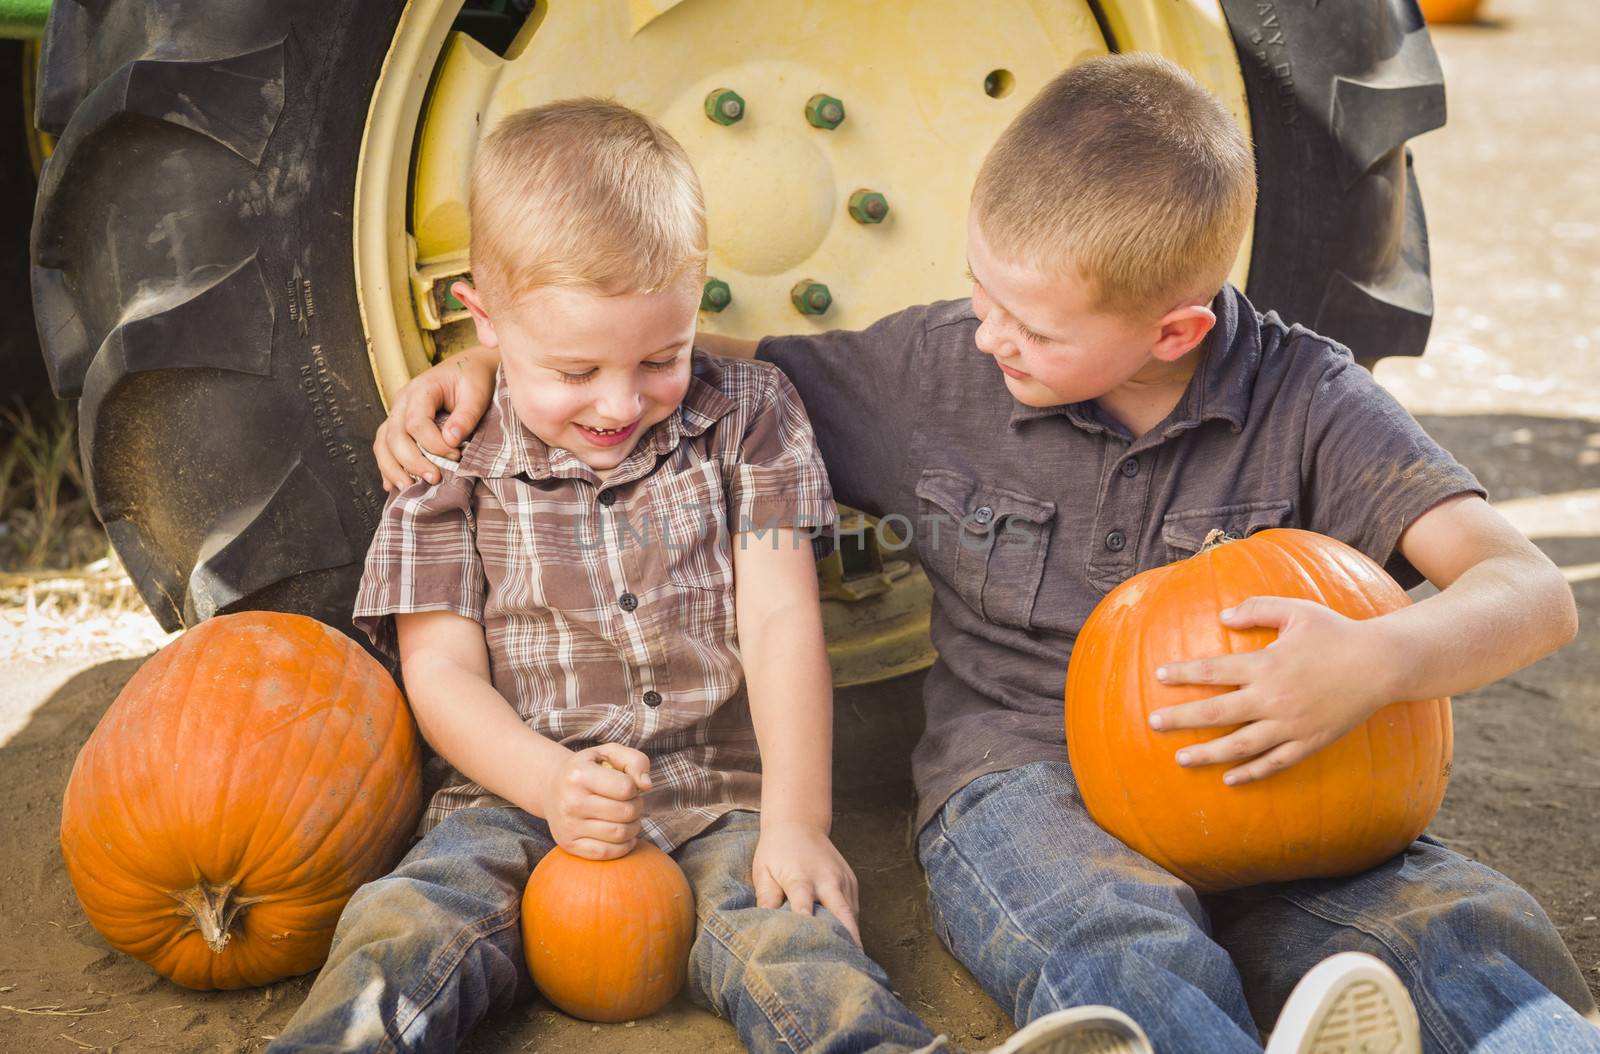 Two Boys Sitting Against a Tractor Tire Holding Pumpkins and Talking in Rustic Setting.